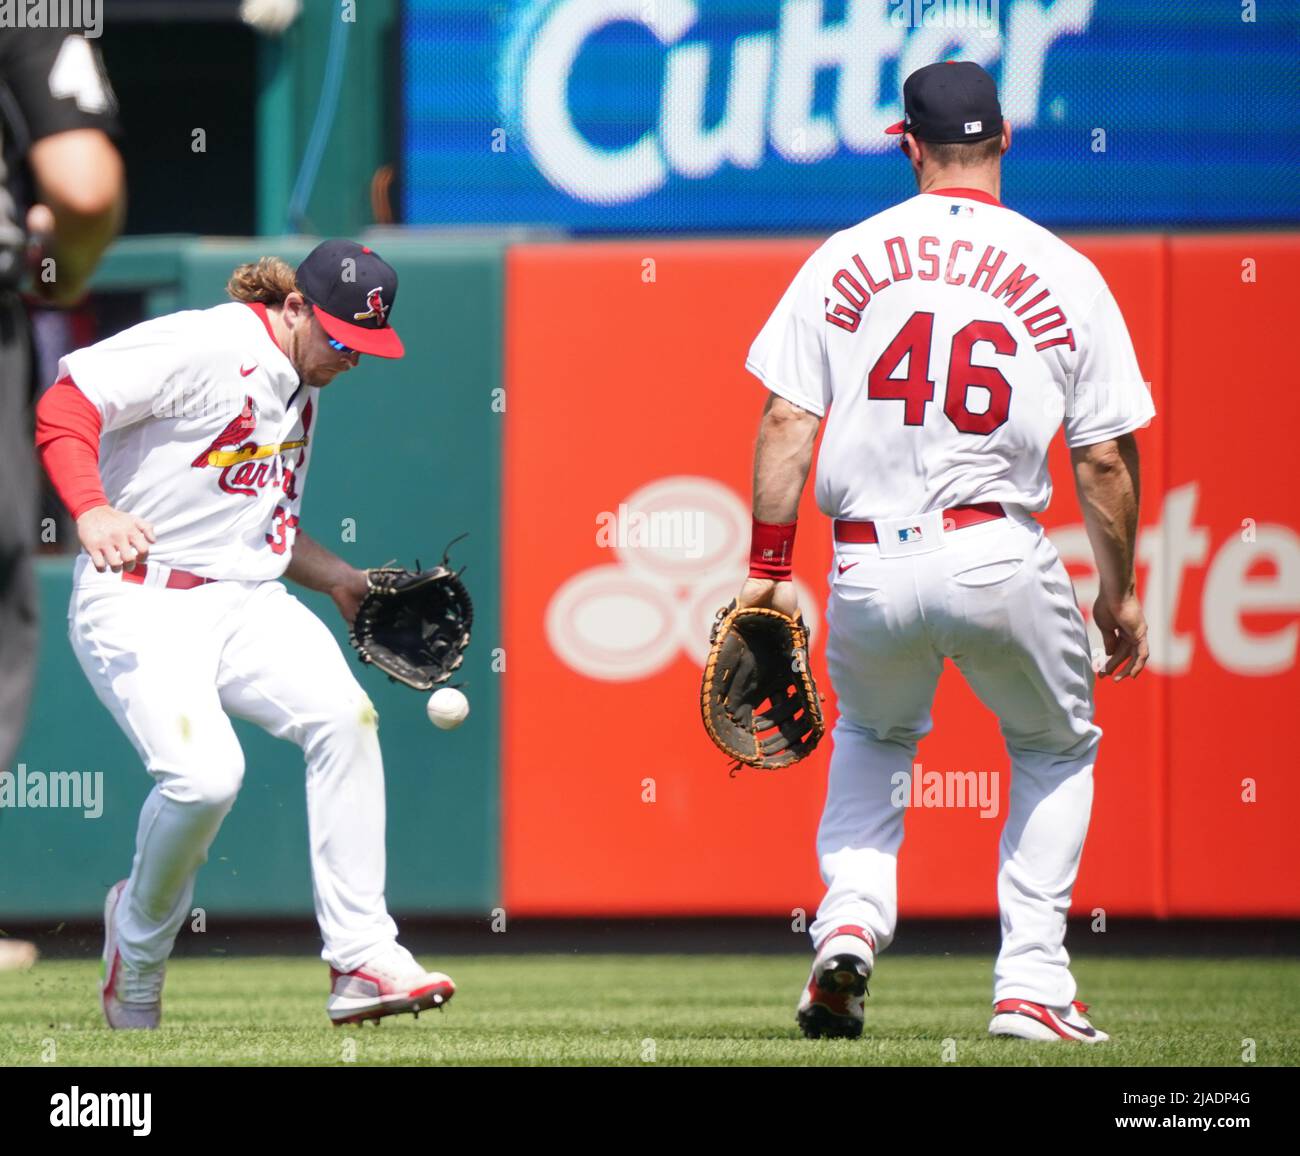 St. Louis, United States. 29th May, 2022. St. Louis Cardinals Brendan Donovan (L) and Paul Goldschmidt watch the baseball drop in for a single off the bat of Milwaukee Brewers Luis Urias in the seventh inning at Busch Stadium in St. Louis on Sunday, May 29, 2022. The hit was good for a single. Photo by Bill Greenblatt/UPI Credit: UPI/Alamy Live News Stock Photo